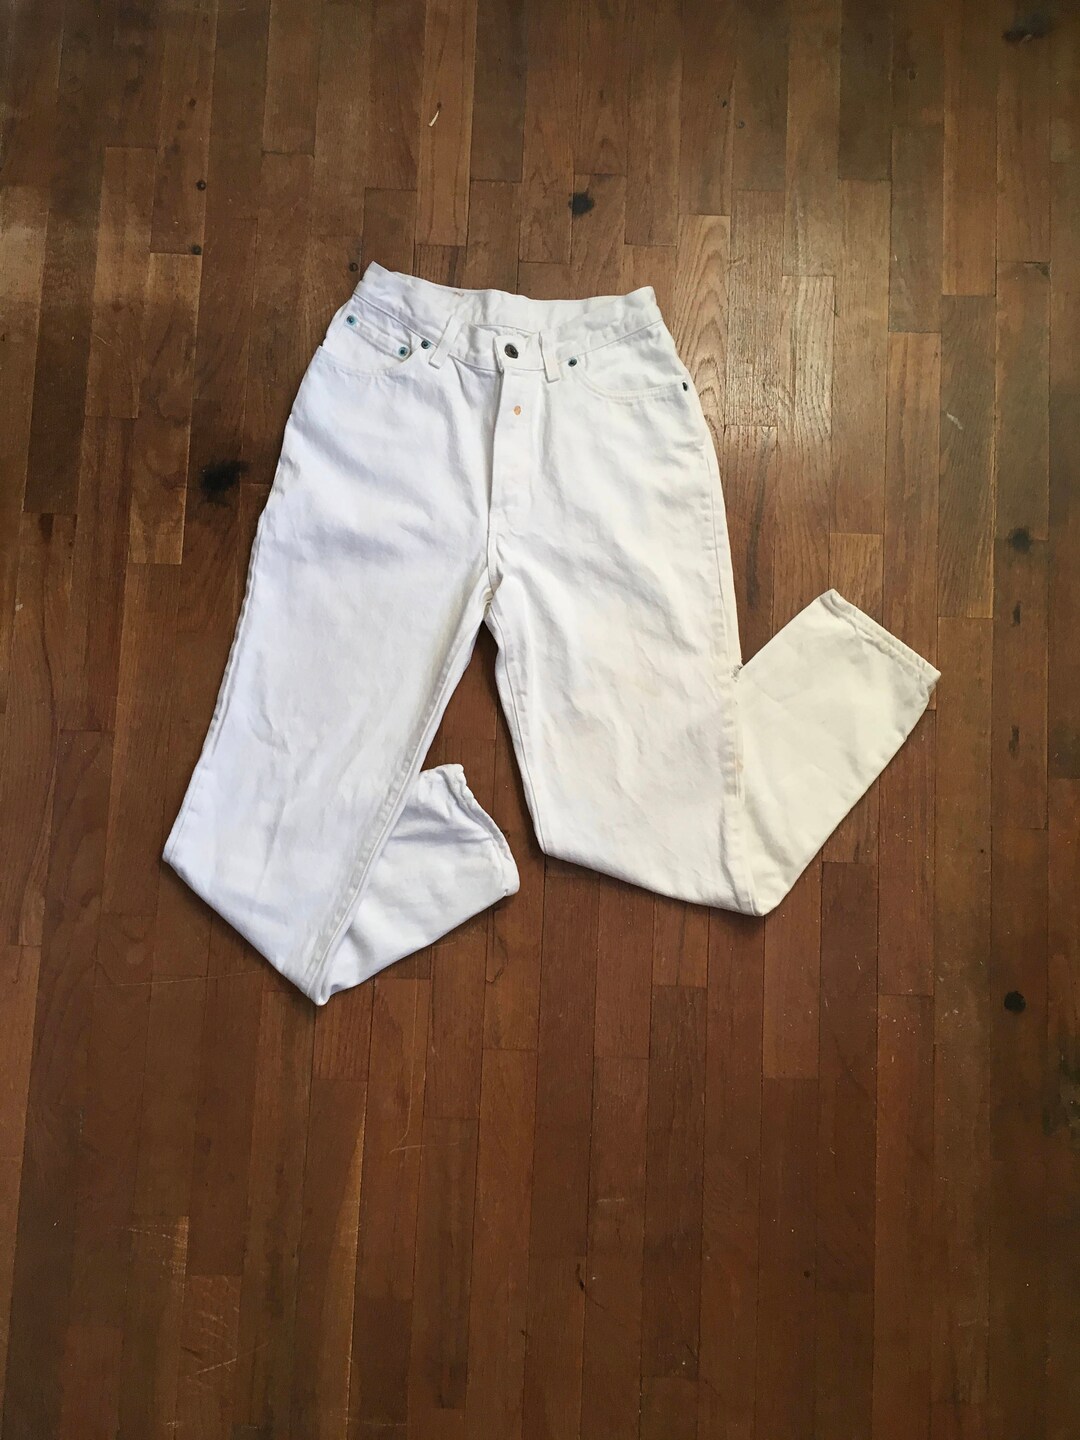 Vintage Levis 501 White Jeans Made in Usa 27 X 29 - Etsy